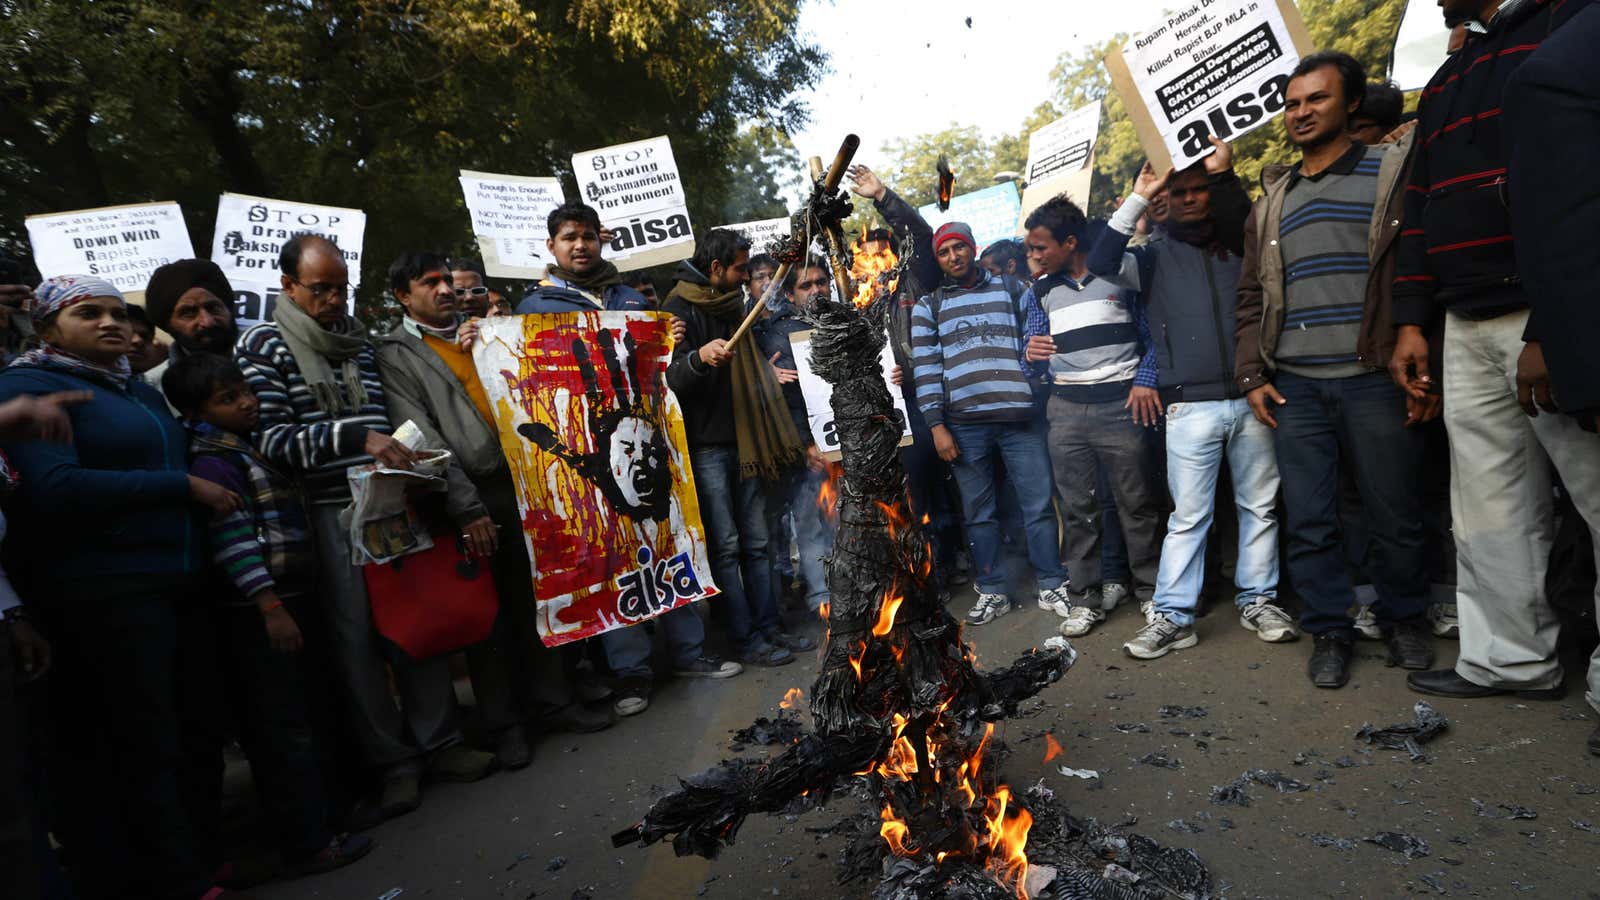 Foot in mouth turns to fire: Indian students burn an effigy representing Hindu nationalist leaders Asaram Bapu and Mohan Bhagwat. Bapu said the victim of the Delhi gang rape was equally responsible for the attack as her assailants. Bhagwat has said rape is an urban problem and that women are duty-bound to look after their husbands.